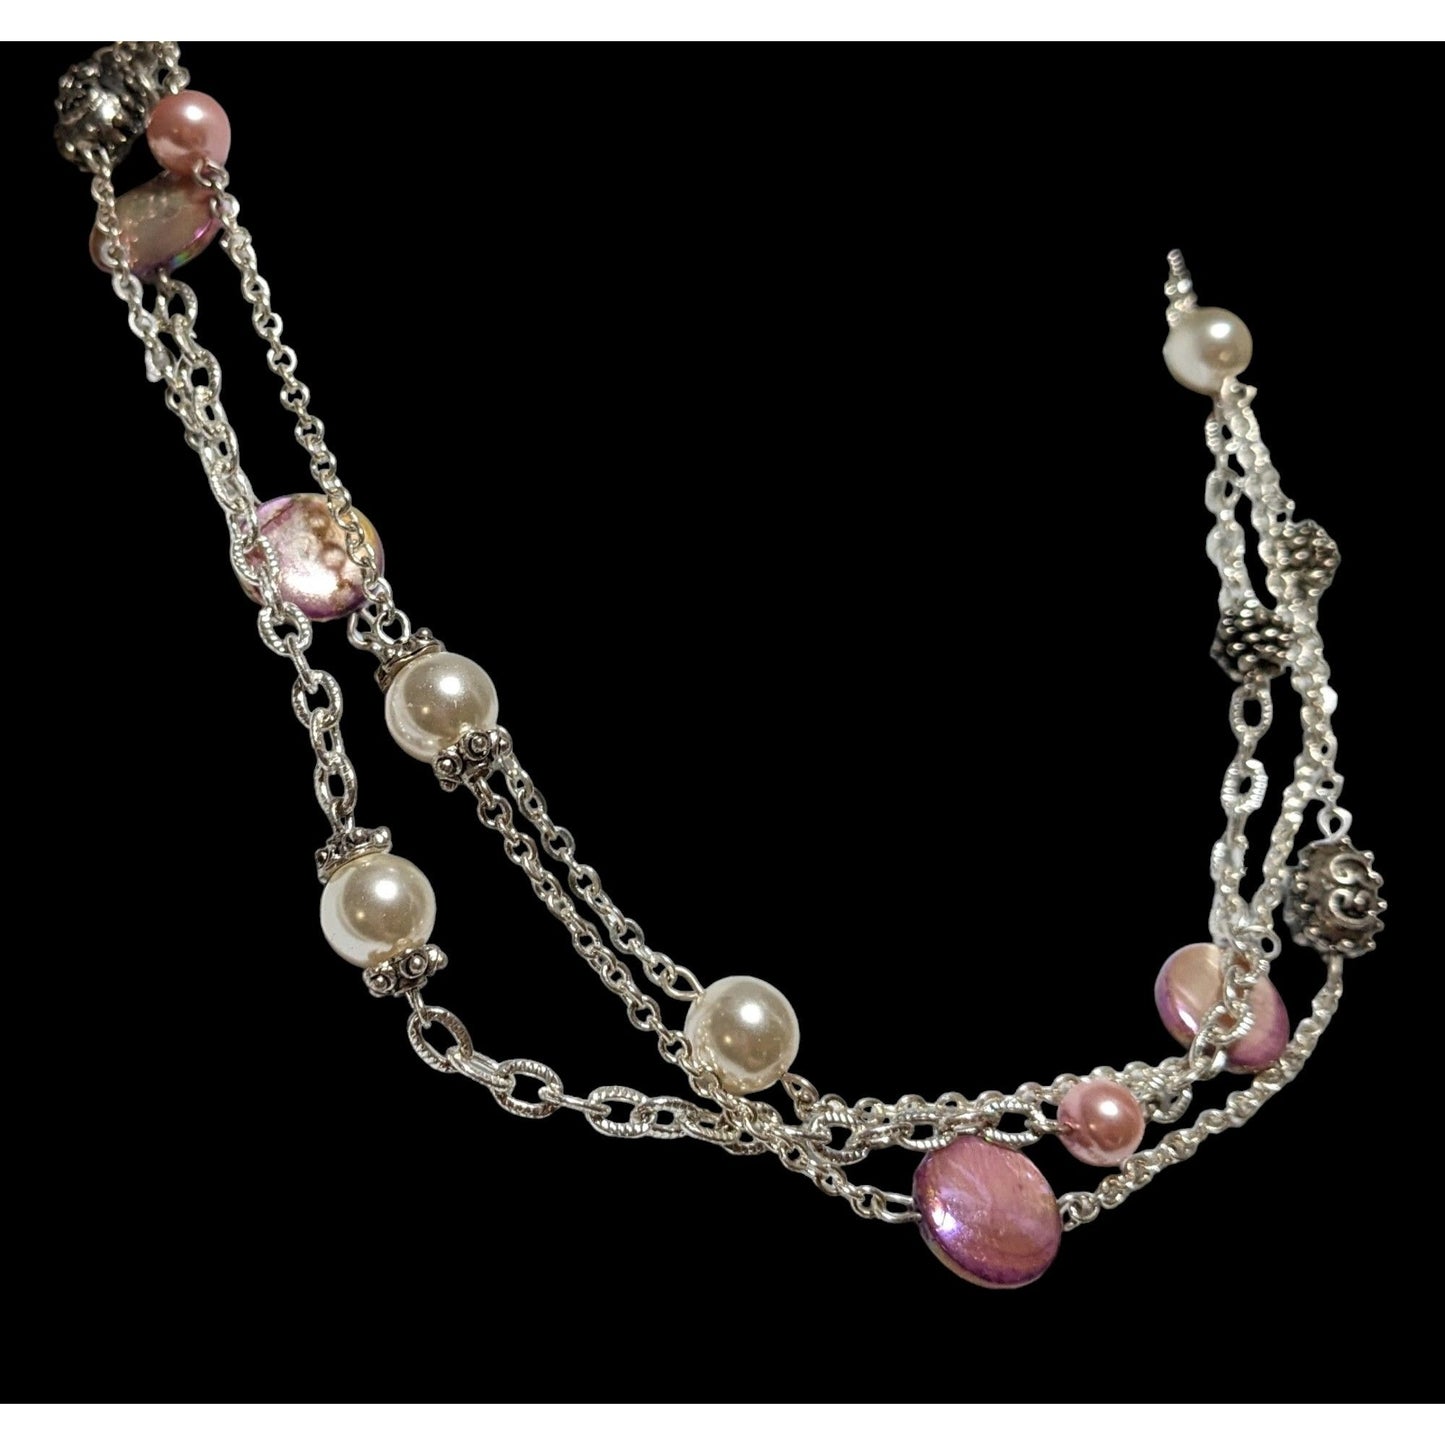 George Silver Necklace With Pink & White Beads